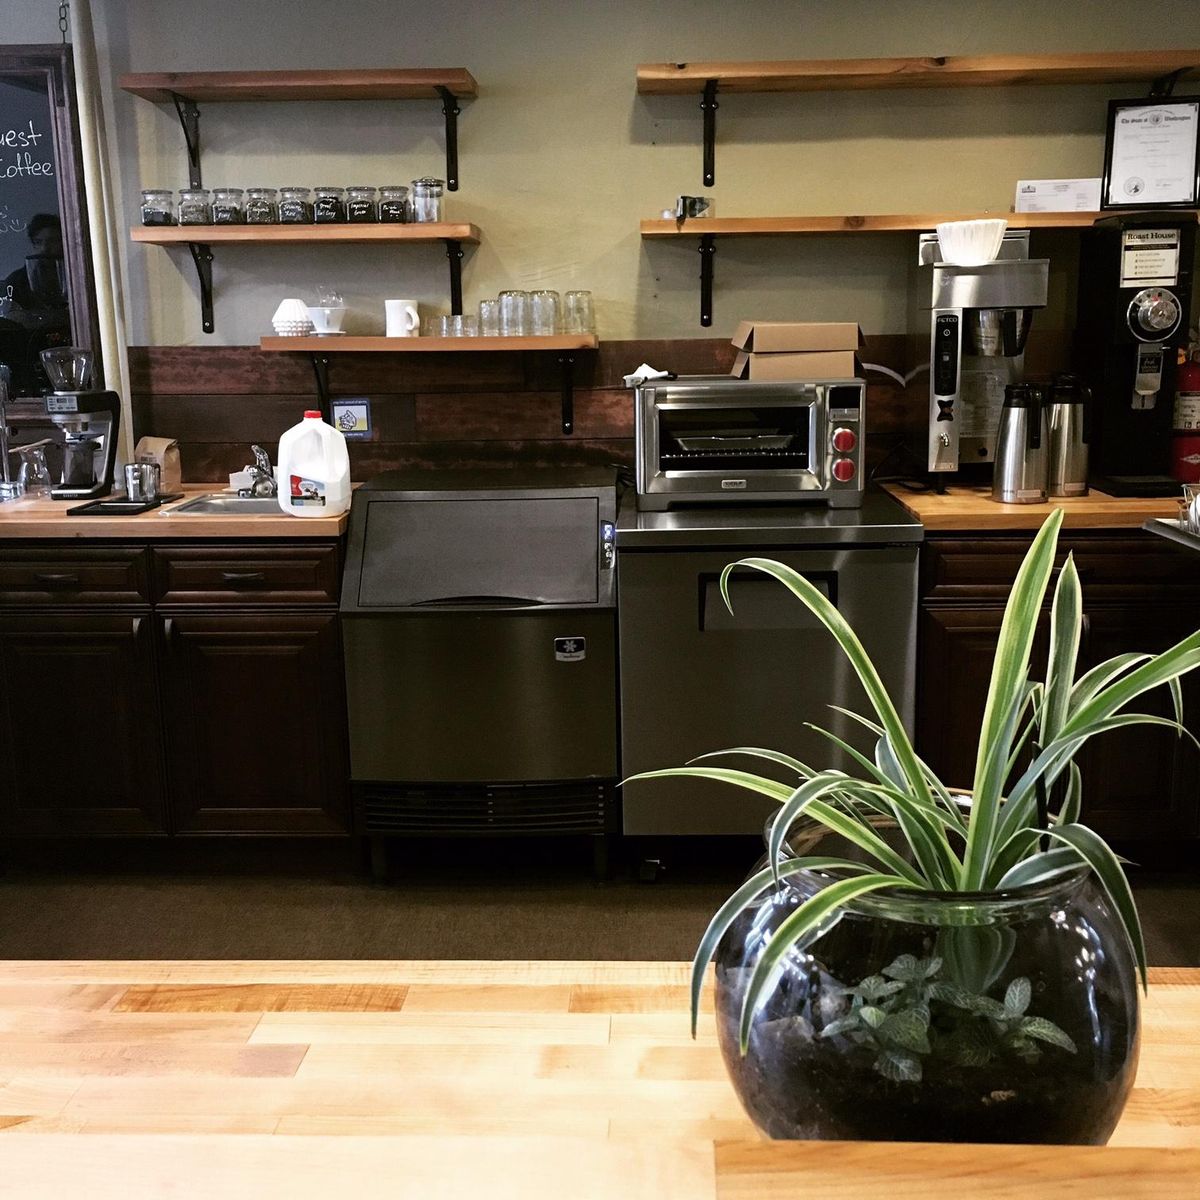 Cedar Coffee on North Monroe Street features a new counter top and coffee bar along with new shelving, carpet and paint. Cedar Coffee opened Wednesday in the spot that used to house Coeur Coffeeshop. (Adriana Janovich)